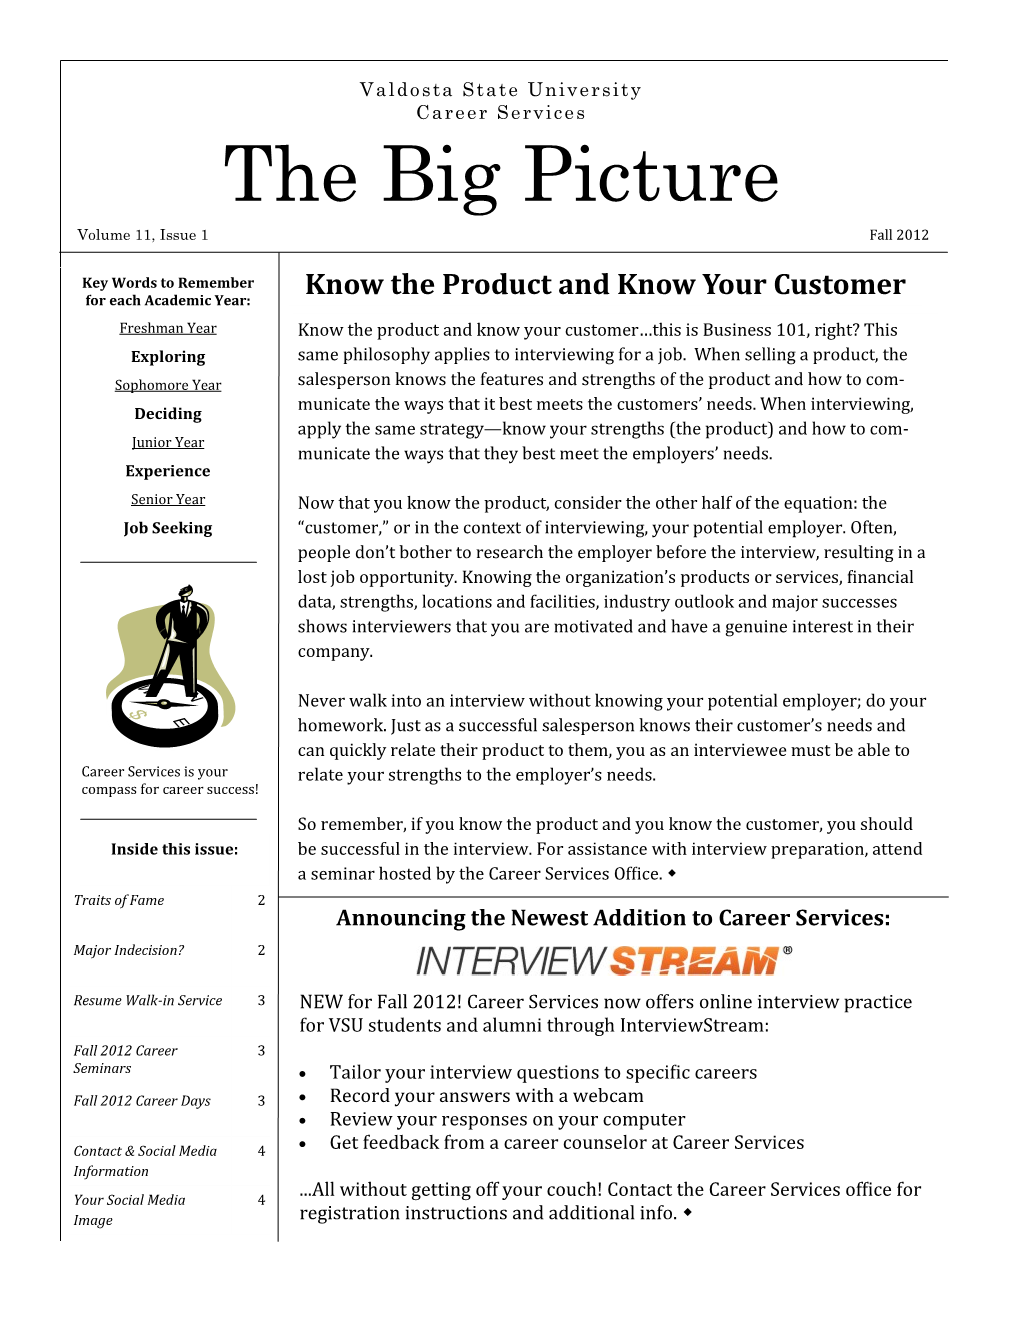 The Big Picture Volume 11, Issue 1 Fall 2012